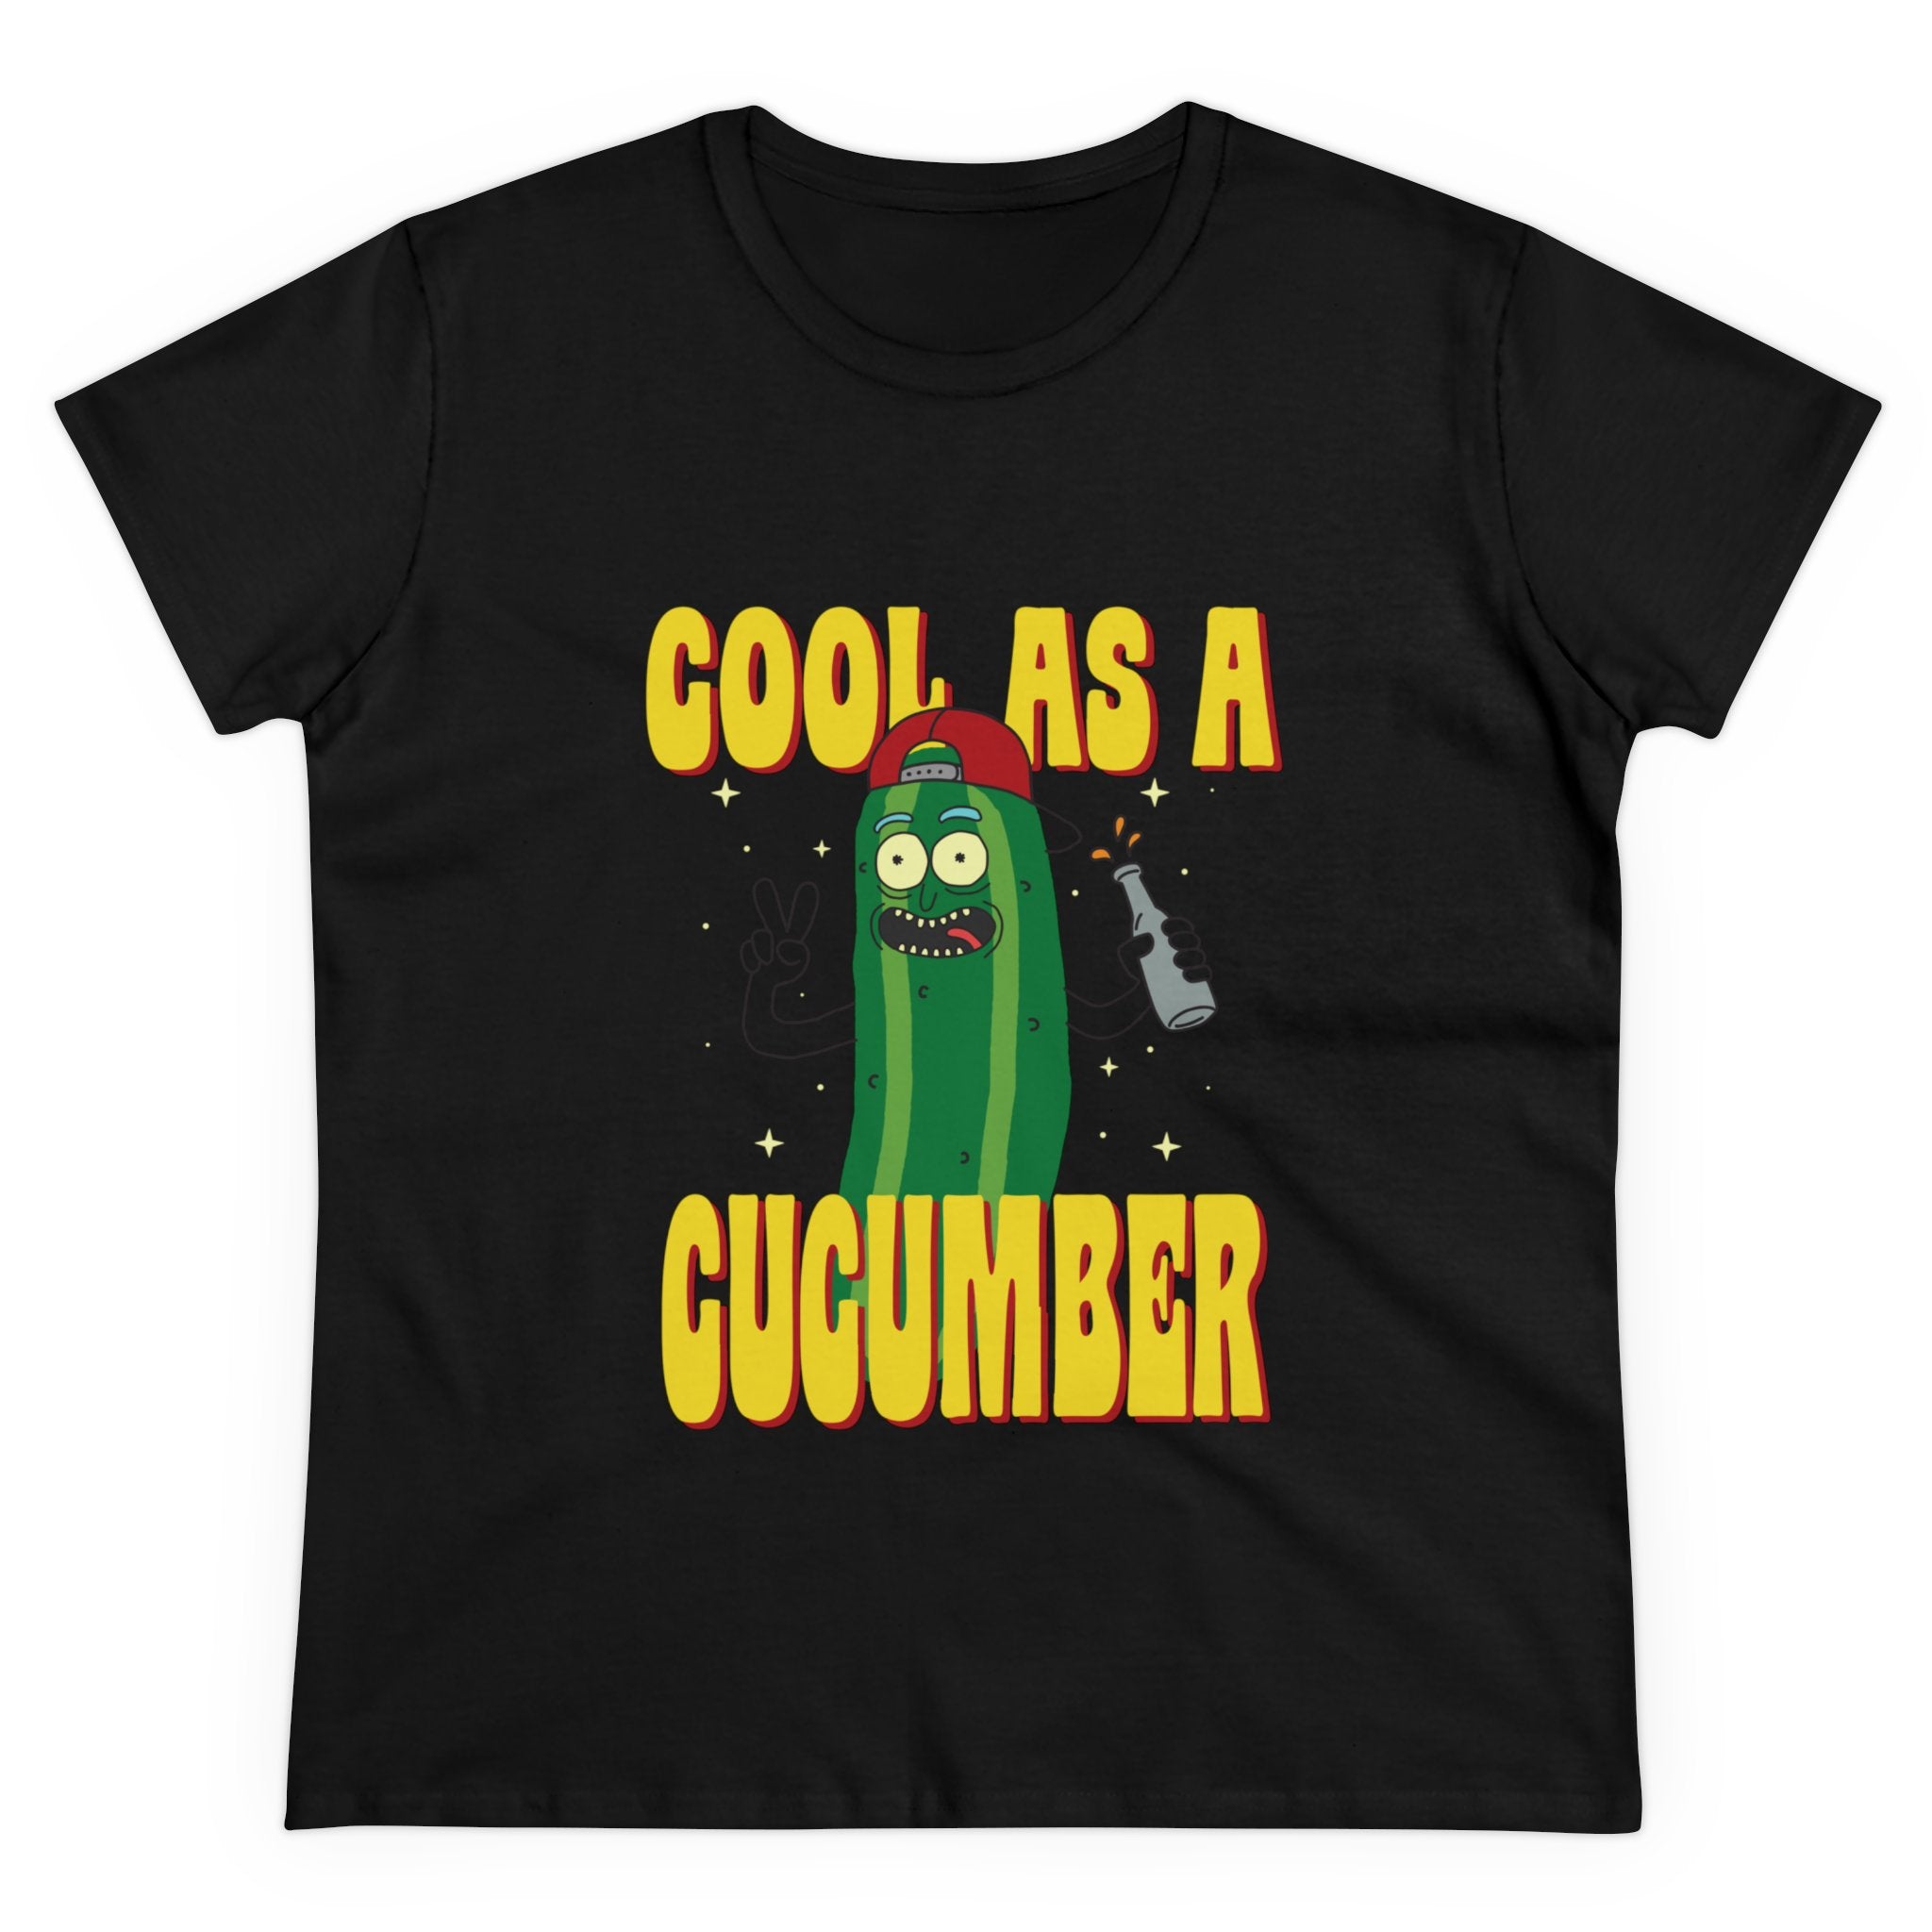 Cool as Cucumber - Women's Tee featuring a cartoon cucumber wearing a red cap, sunglasses, and holding a beverage. The text above and below the cucumber reads, "Cool As A Cucumber." This comfy women's tee has a semi-fitted silhouette made from pre-shrunk cotton for lasting comfort.